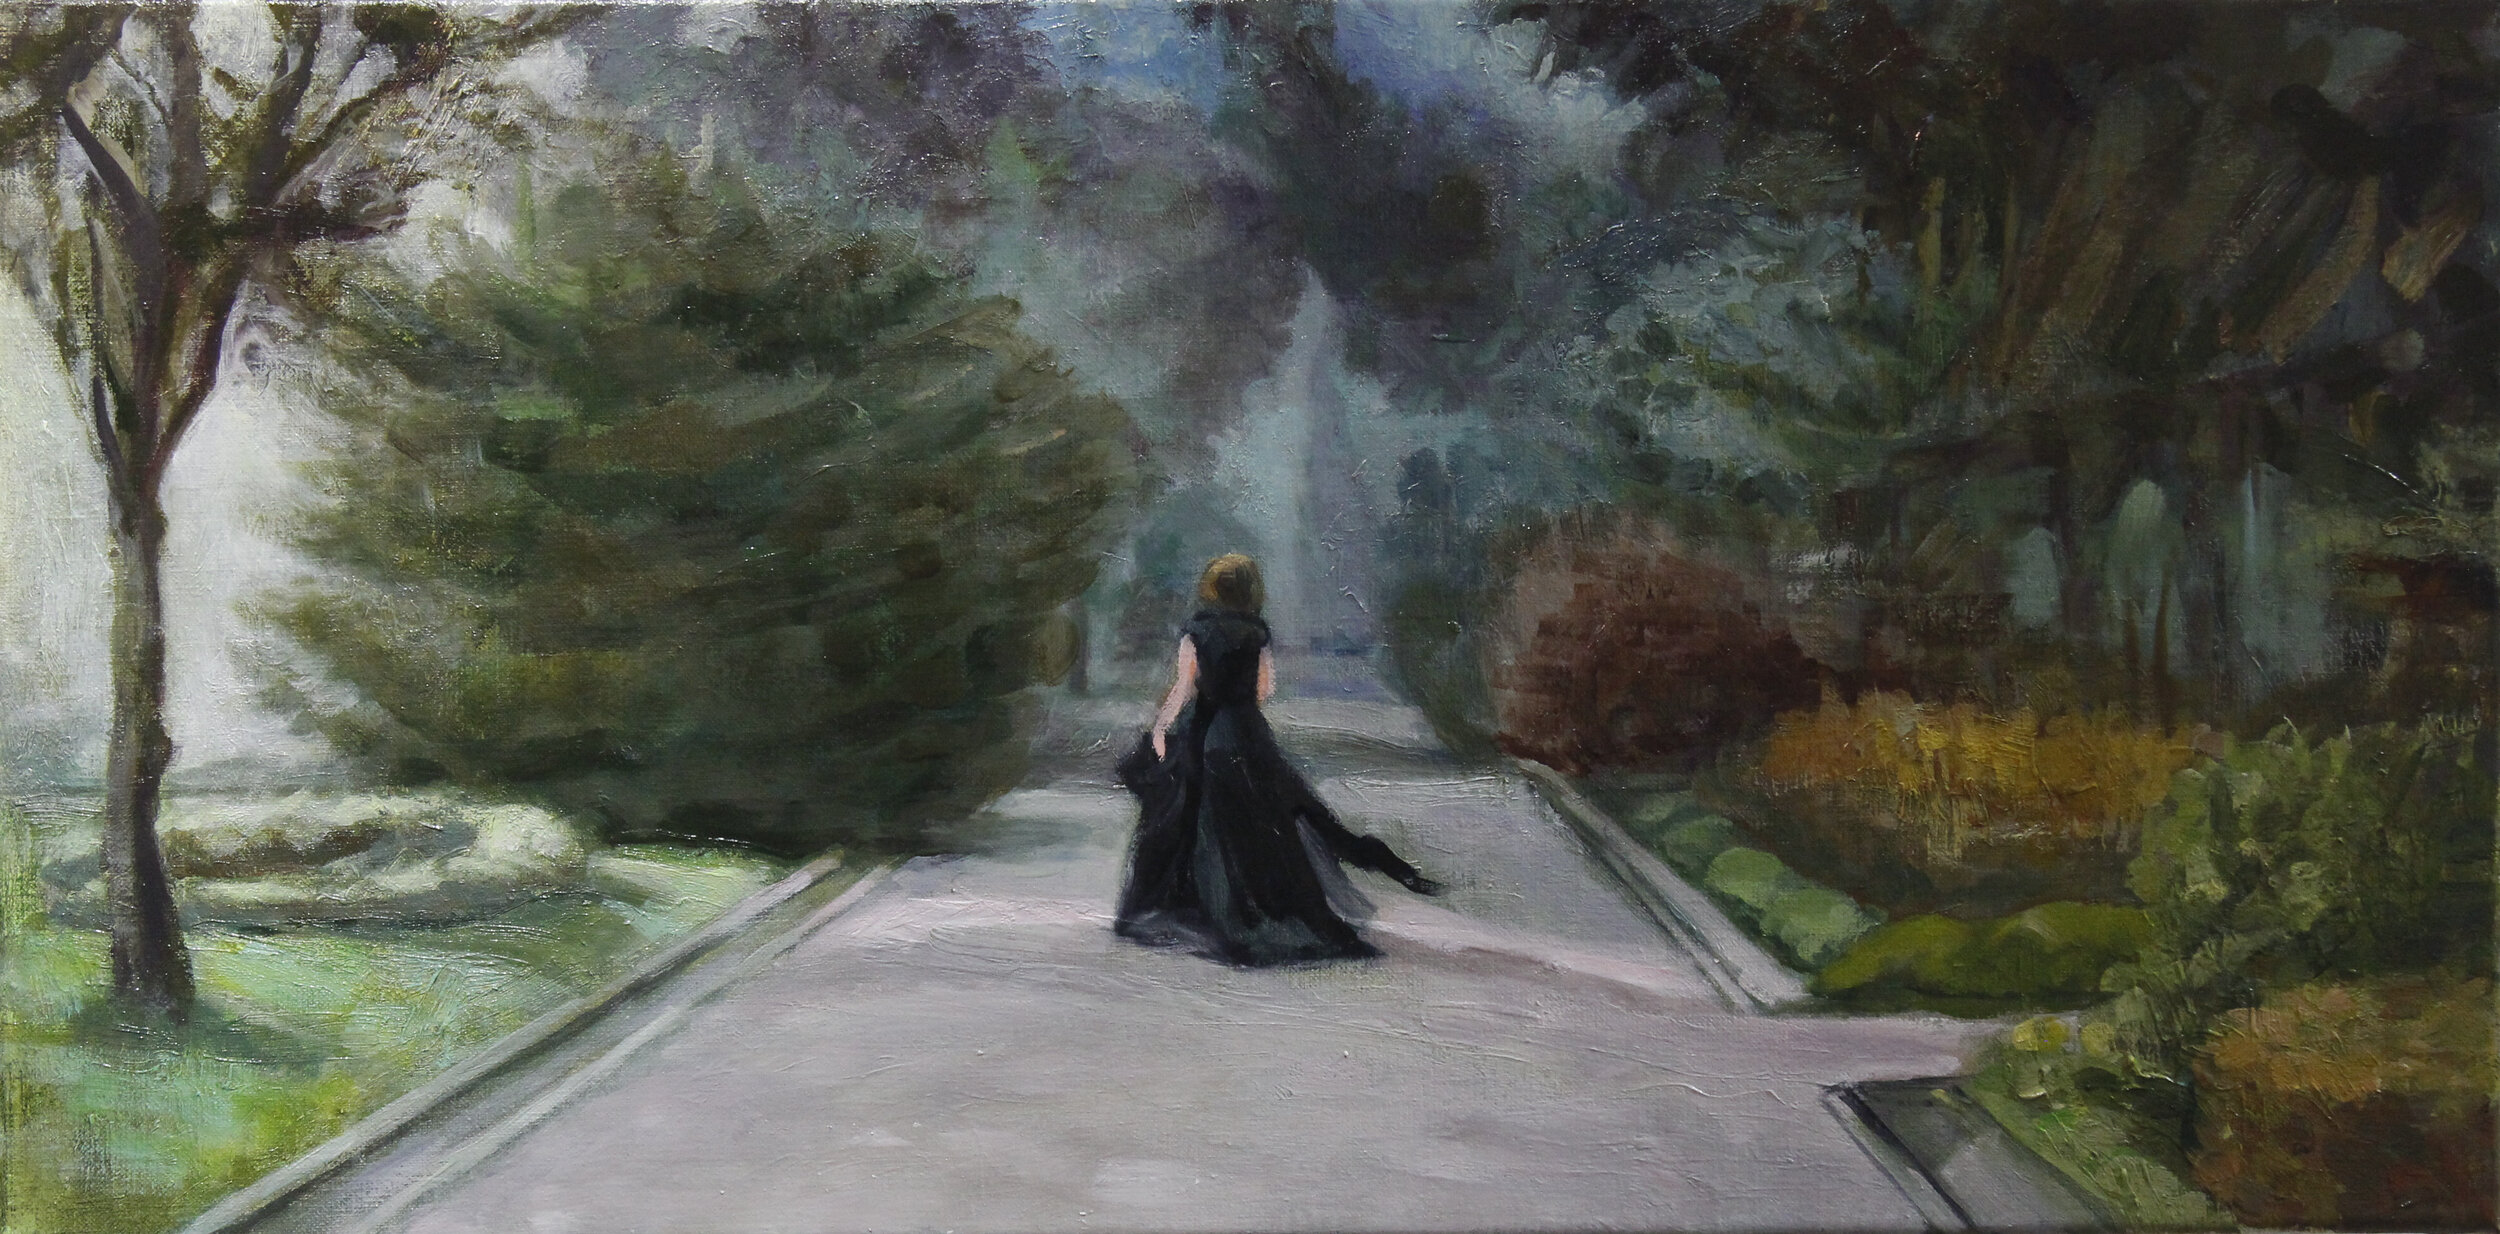 Homage to Luchino Visconti, 2020. Oil on linen, 15x30 inches.